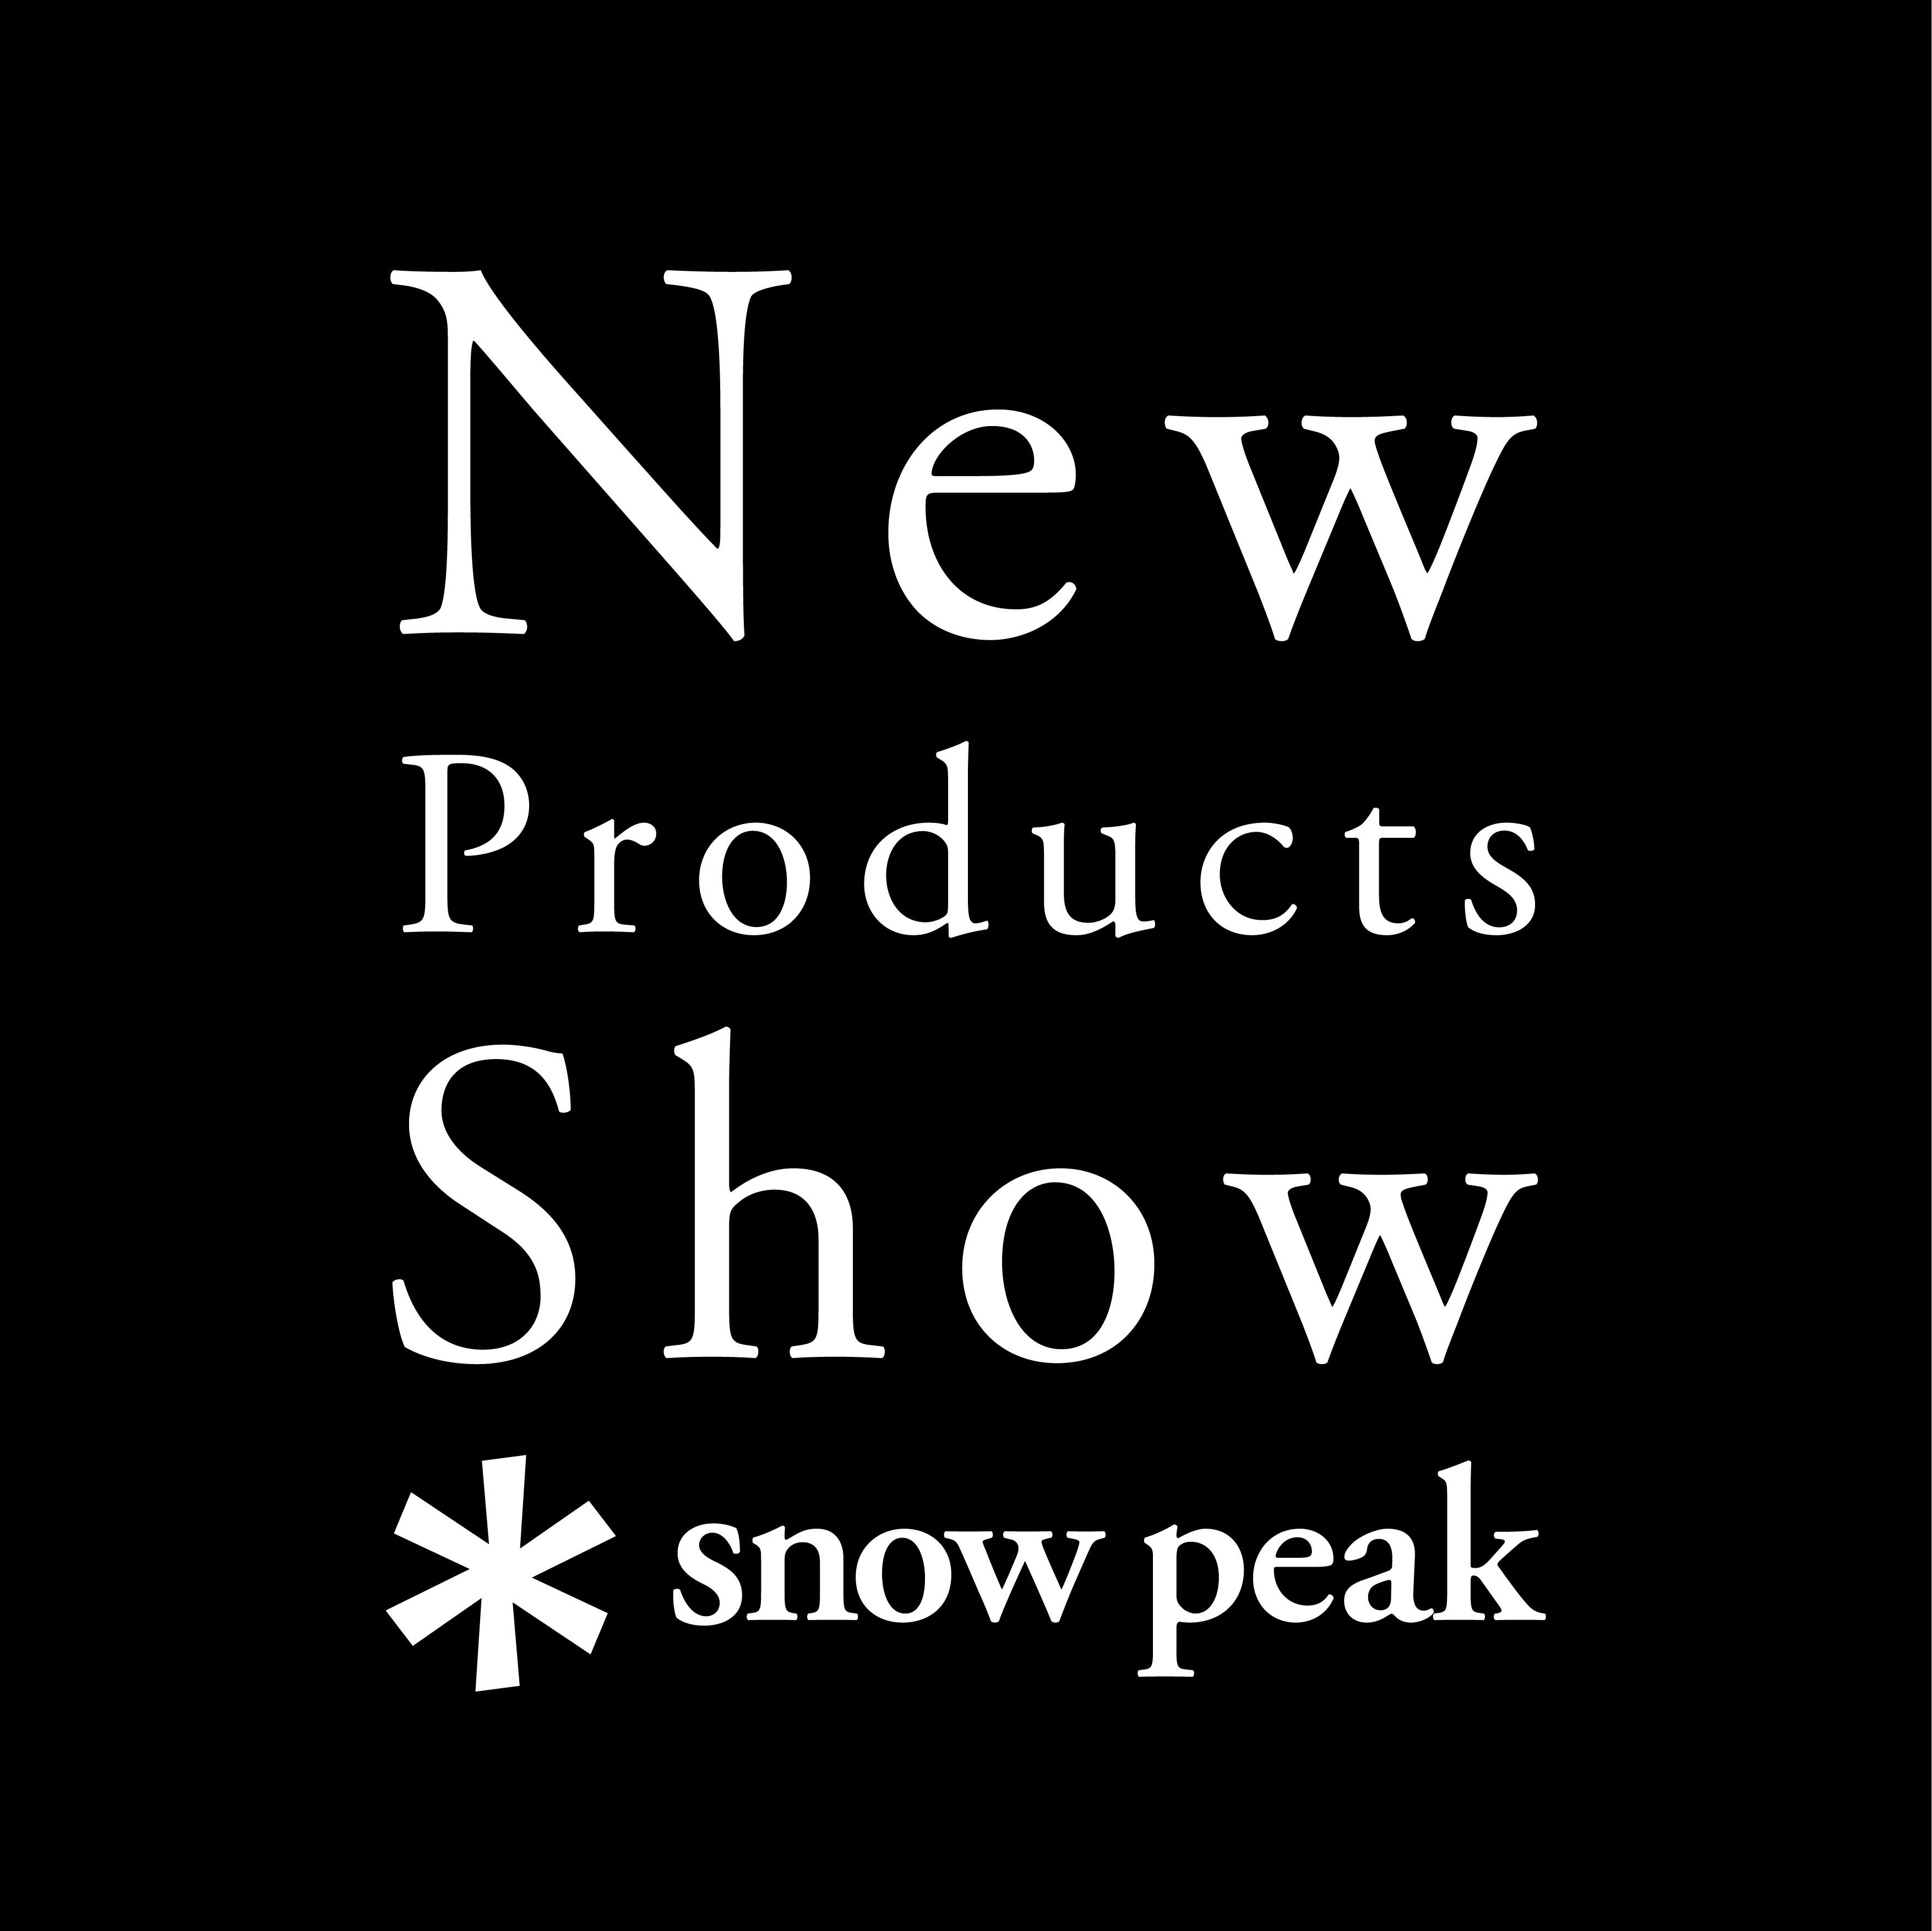 【2023 New Product Show 】